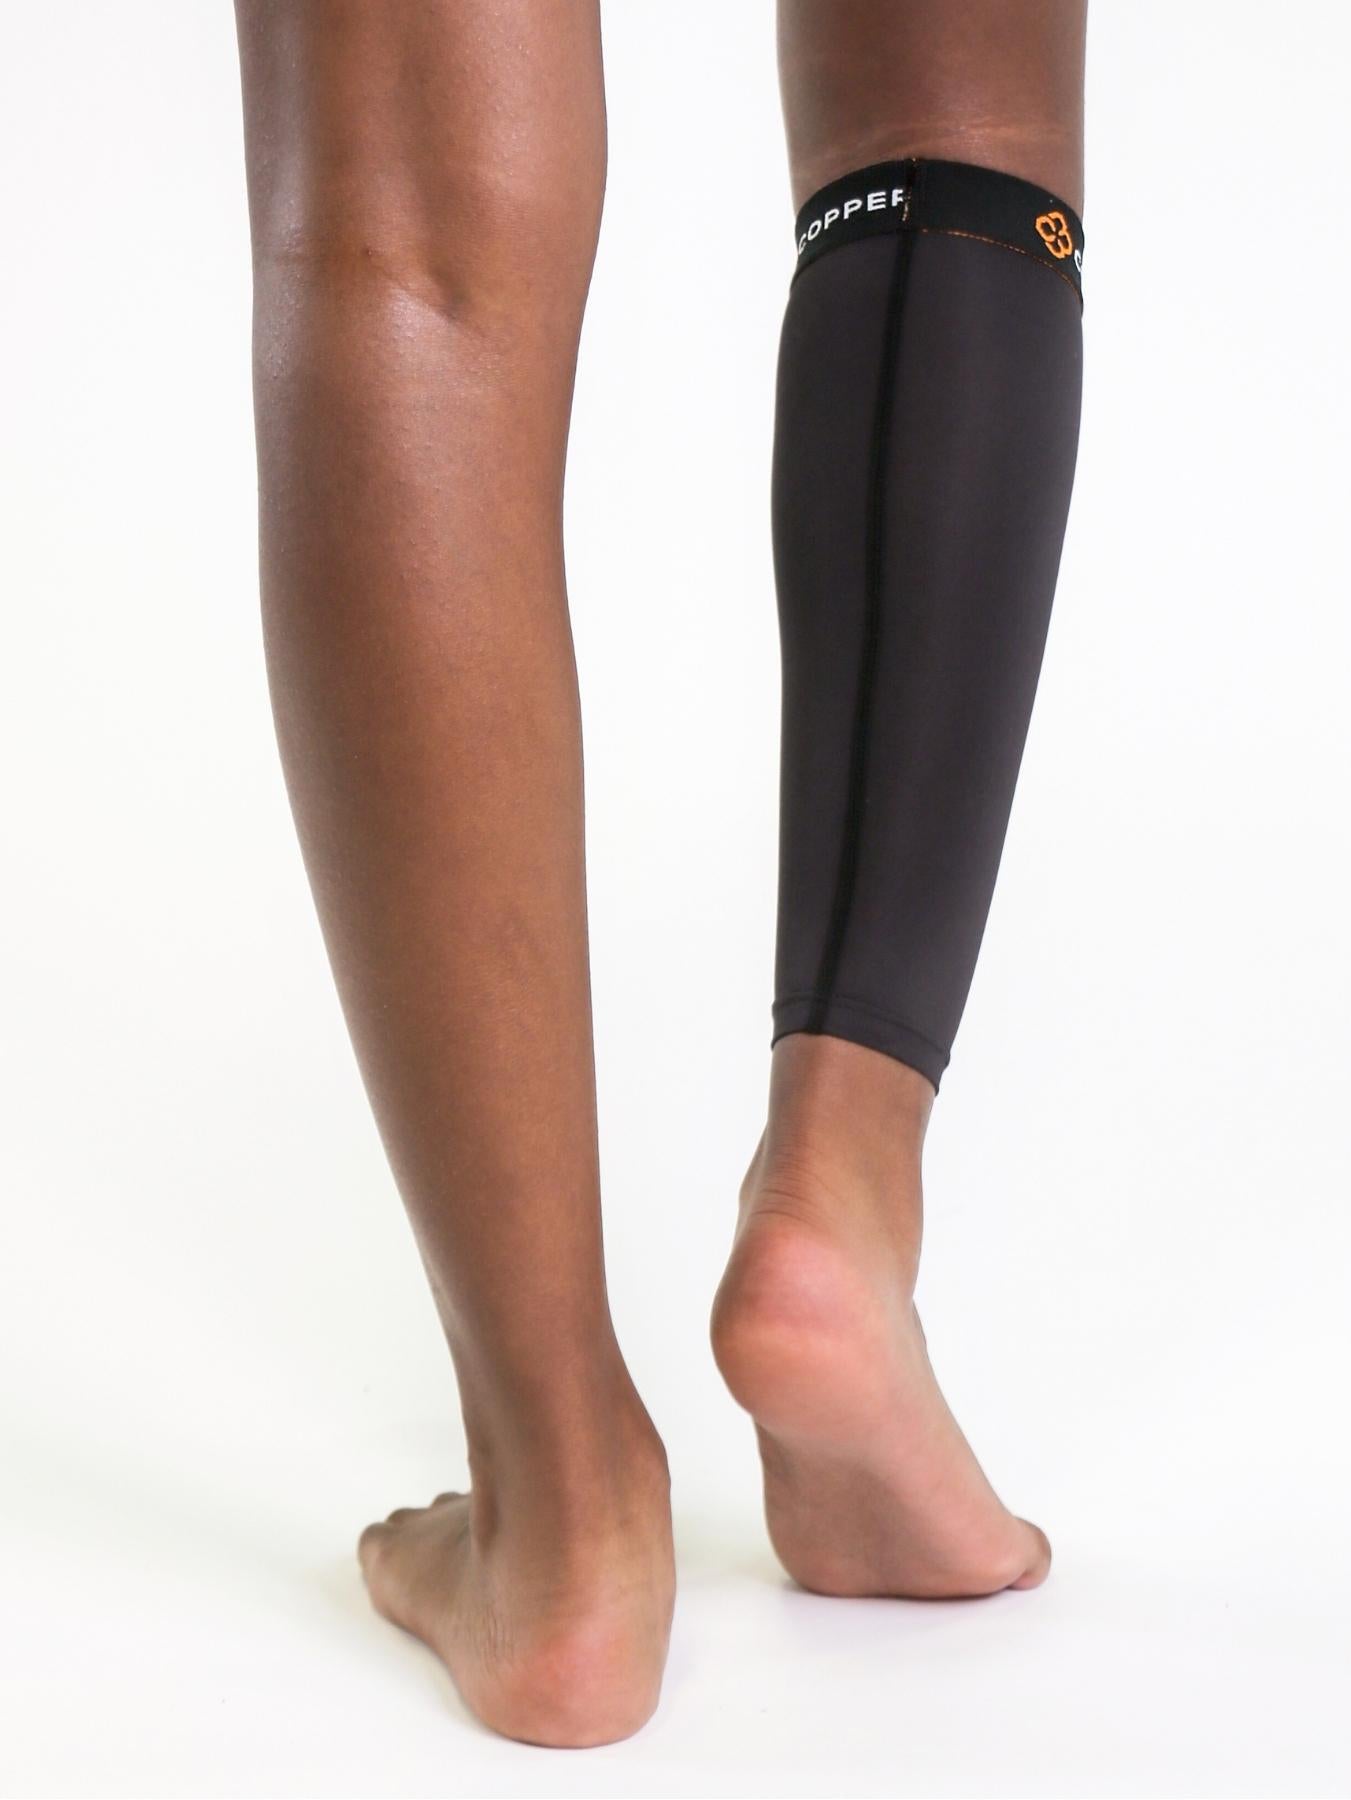 closal Copper fit calf sleeve Knee, Calf & Thigh Support Knee Support - Buy  closal Copper fit calf sleeve Knee, Calf & Thigh Support Knee Support  Online at Best Prices in India 